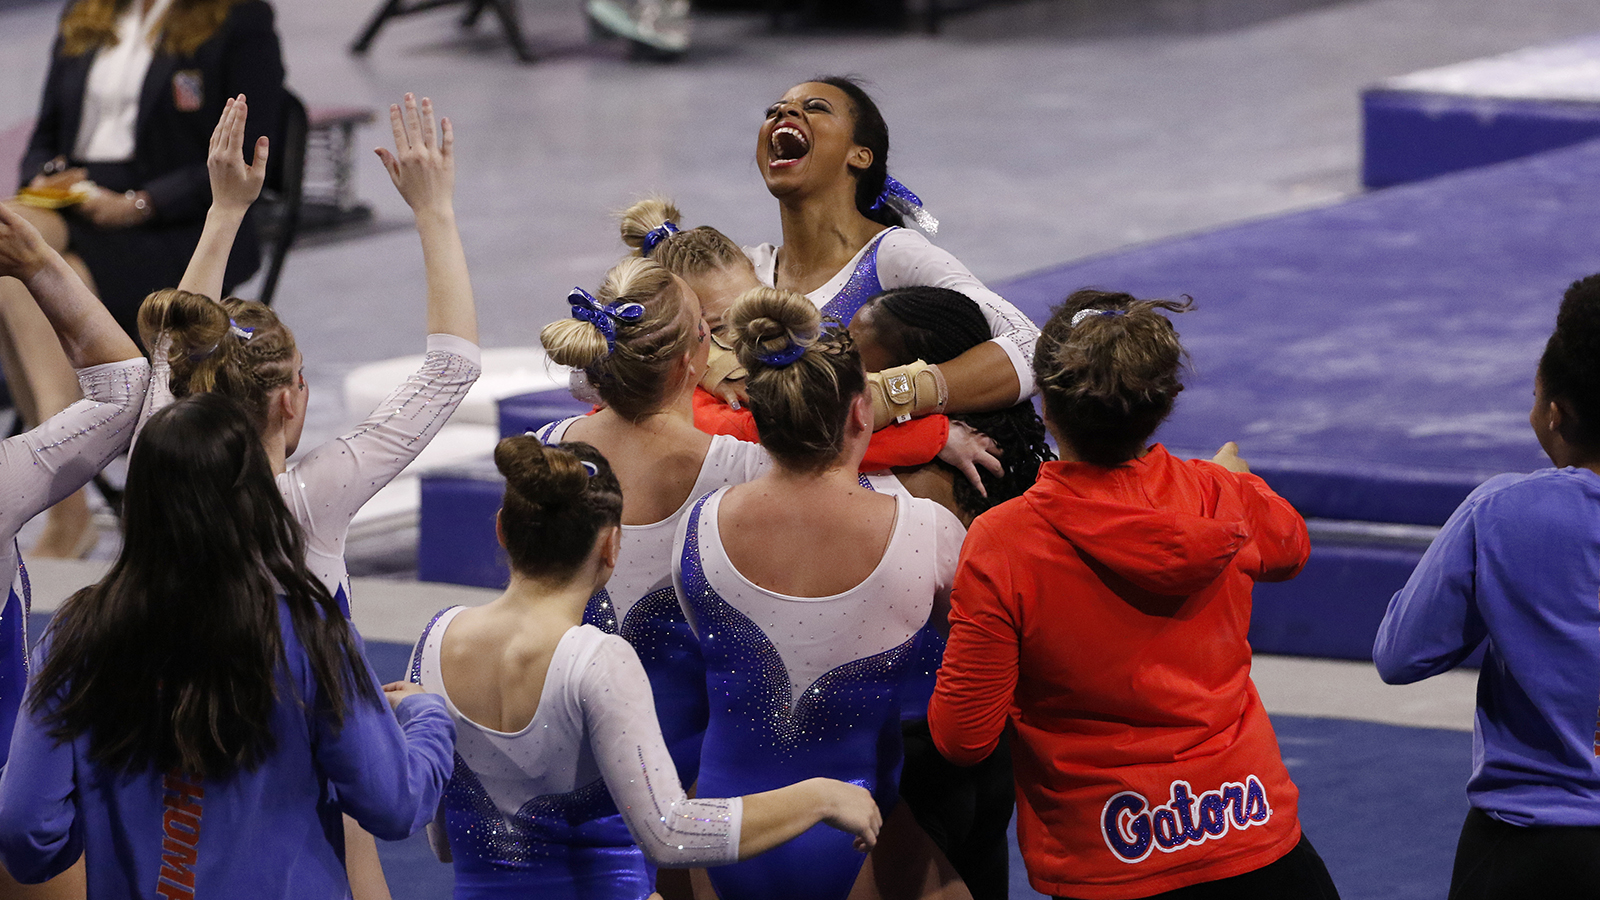 Multiple NCAA gymnastics programs accused of racism by former athletes